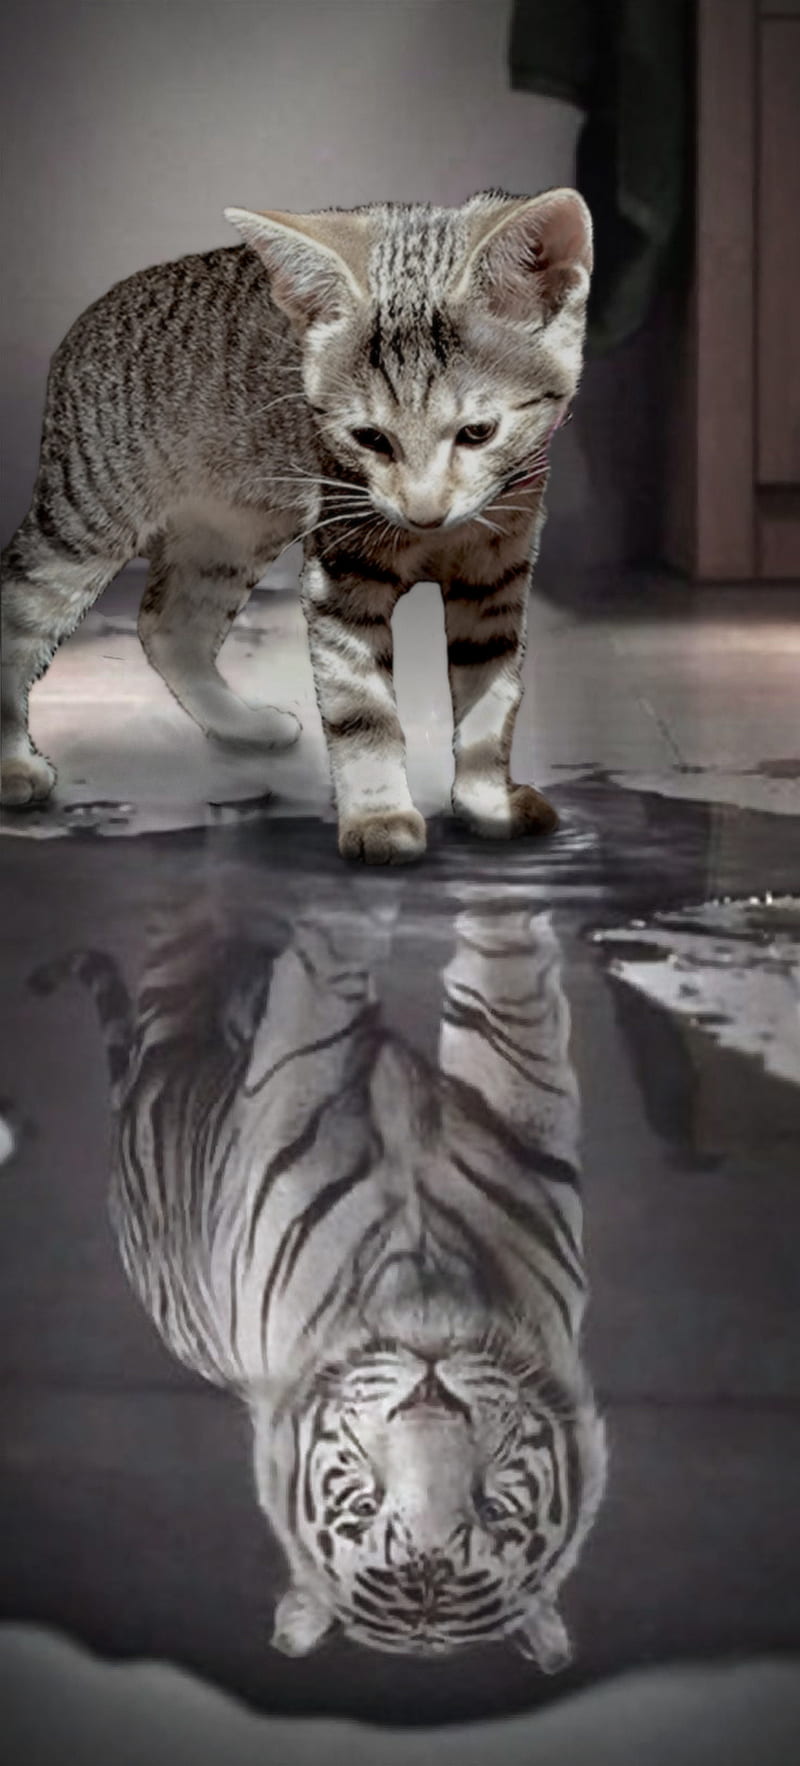 1366x768px, 720P free download | Tiger reflection, animal, black and